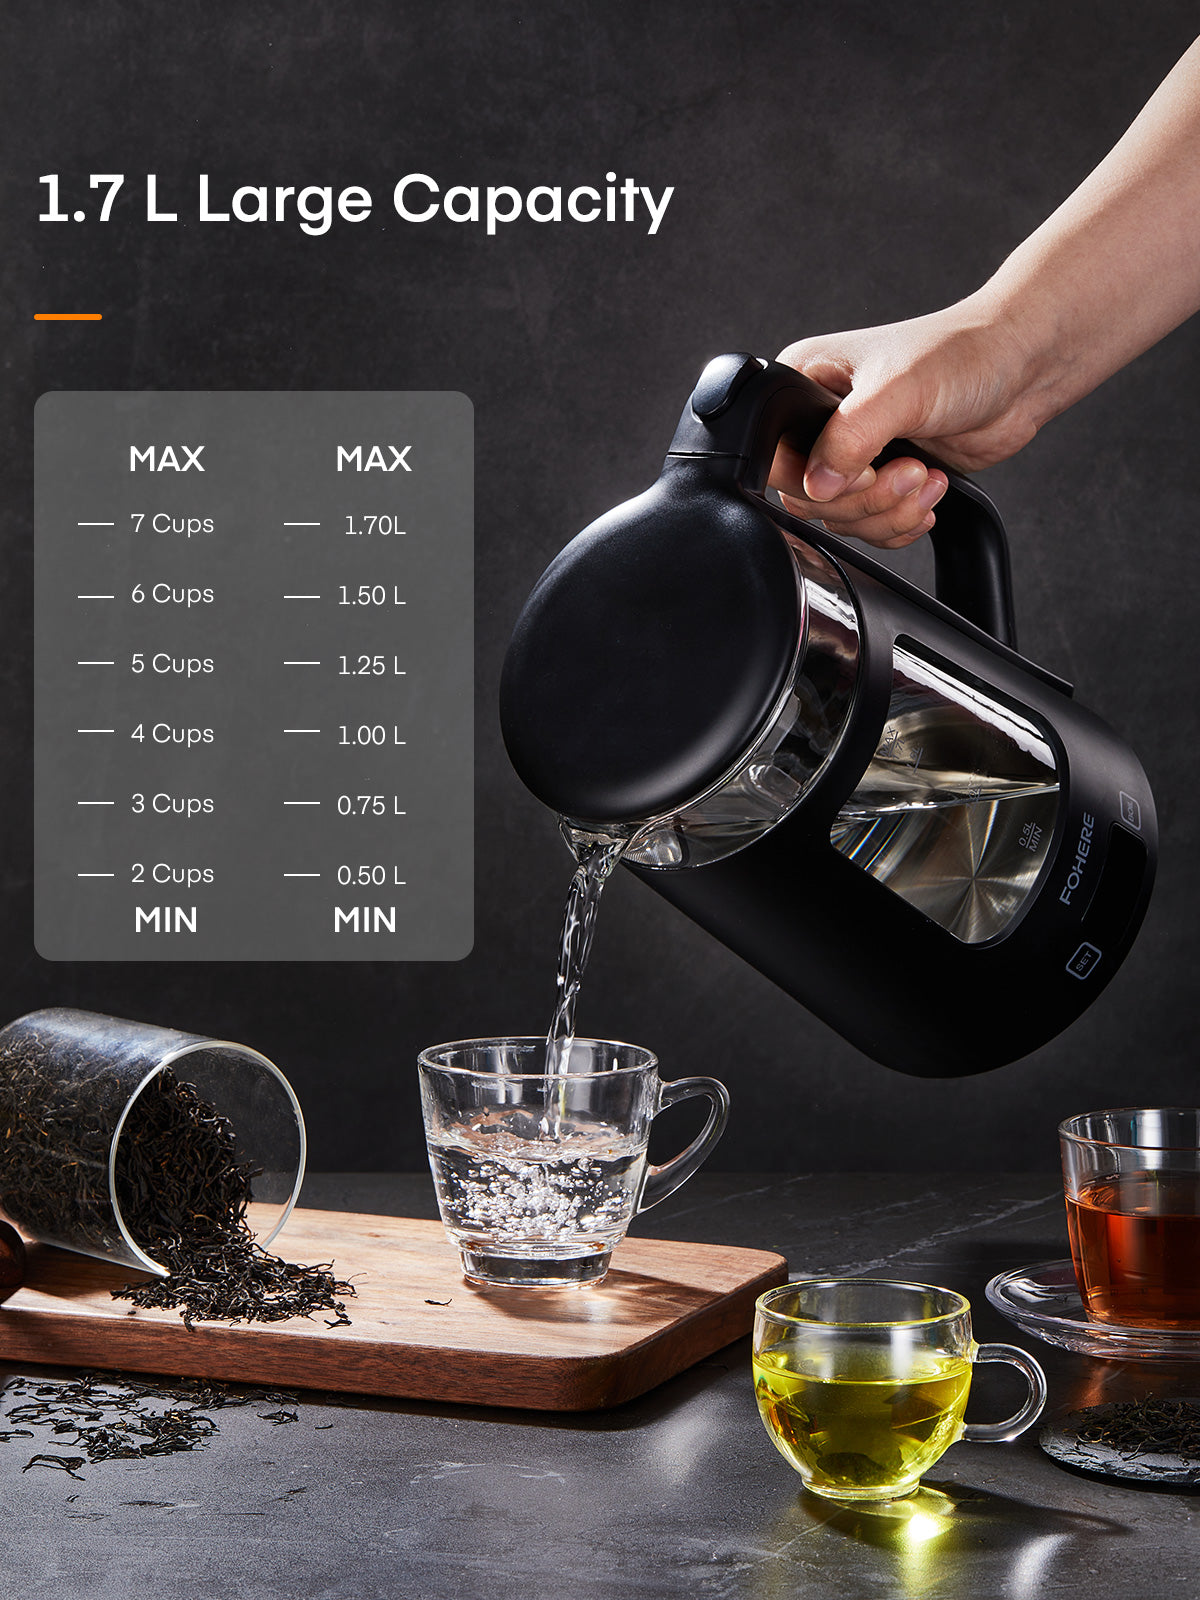 Electric Kettle, 1.7L Tea Kettle, FOHERE Wide Opening Glass Kettle, 1500W Fast Boil, 5 Temperature Control, Auto Shut-Off & Boil-Dry Protection, with 5 Colored Lights, BPA-Free, Easy to Clean, Black